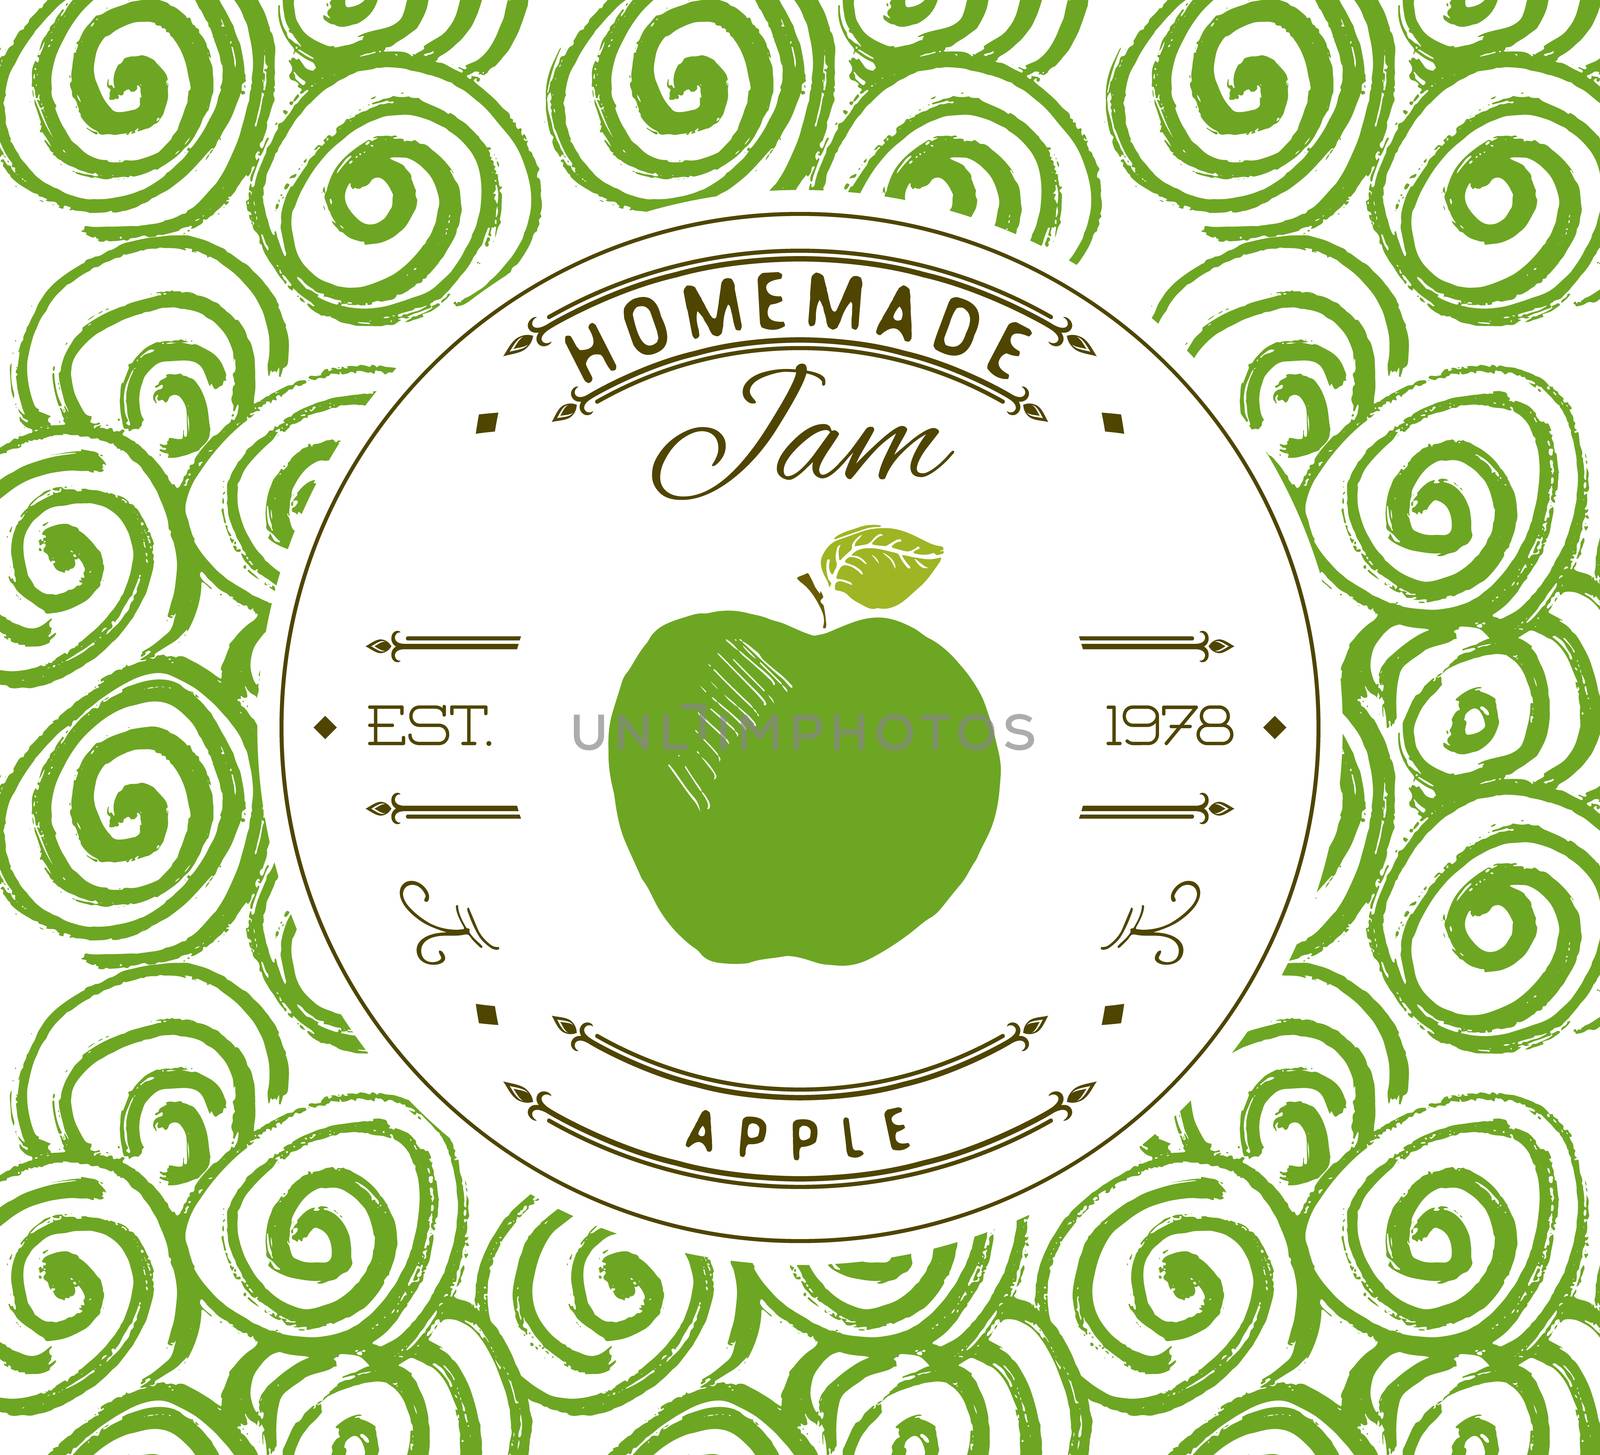 Jam label design template. for apple dessert product with hand drawn sketched fruit and background. Doodle vector apple illustration brand identity.